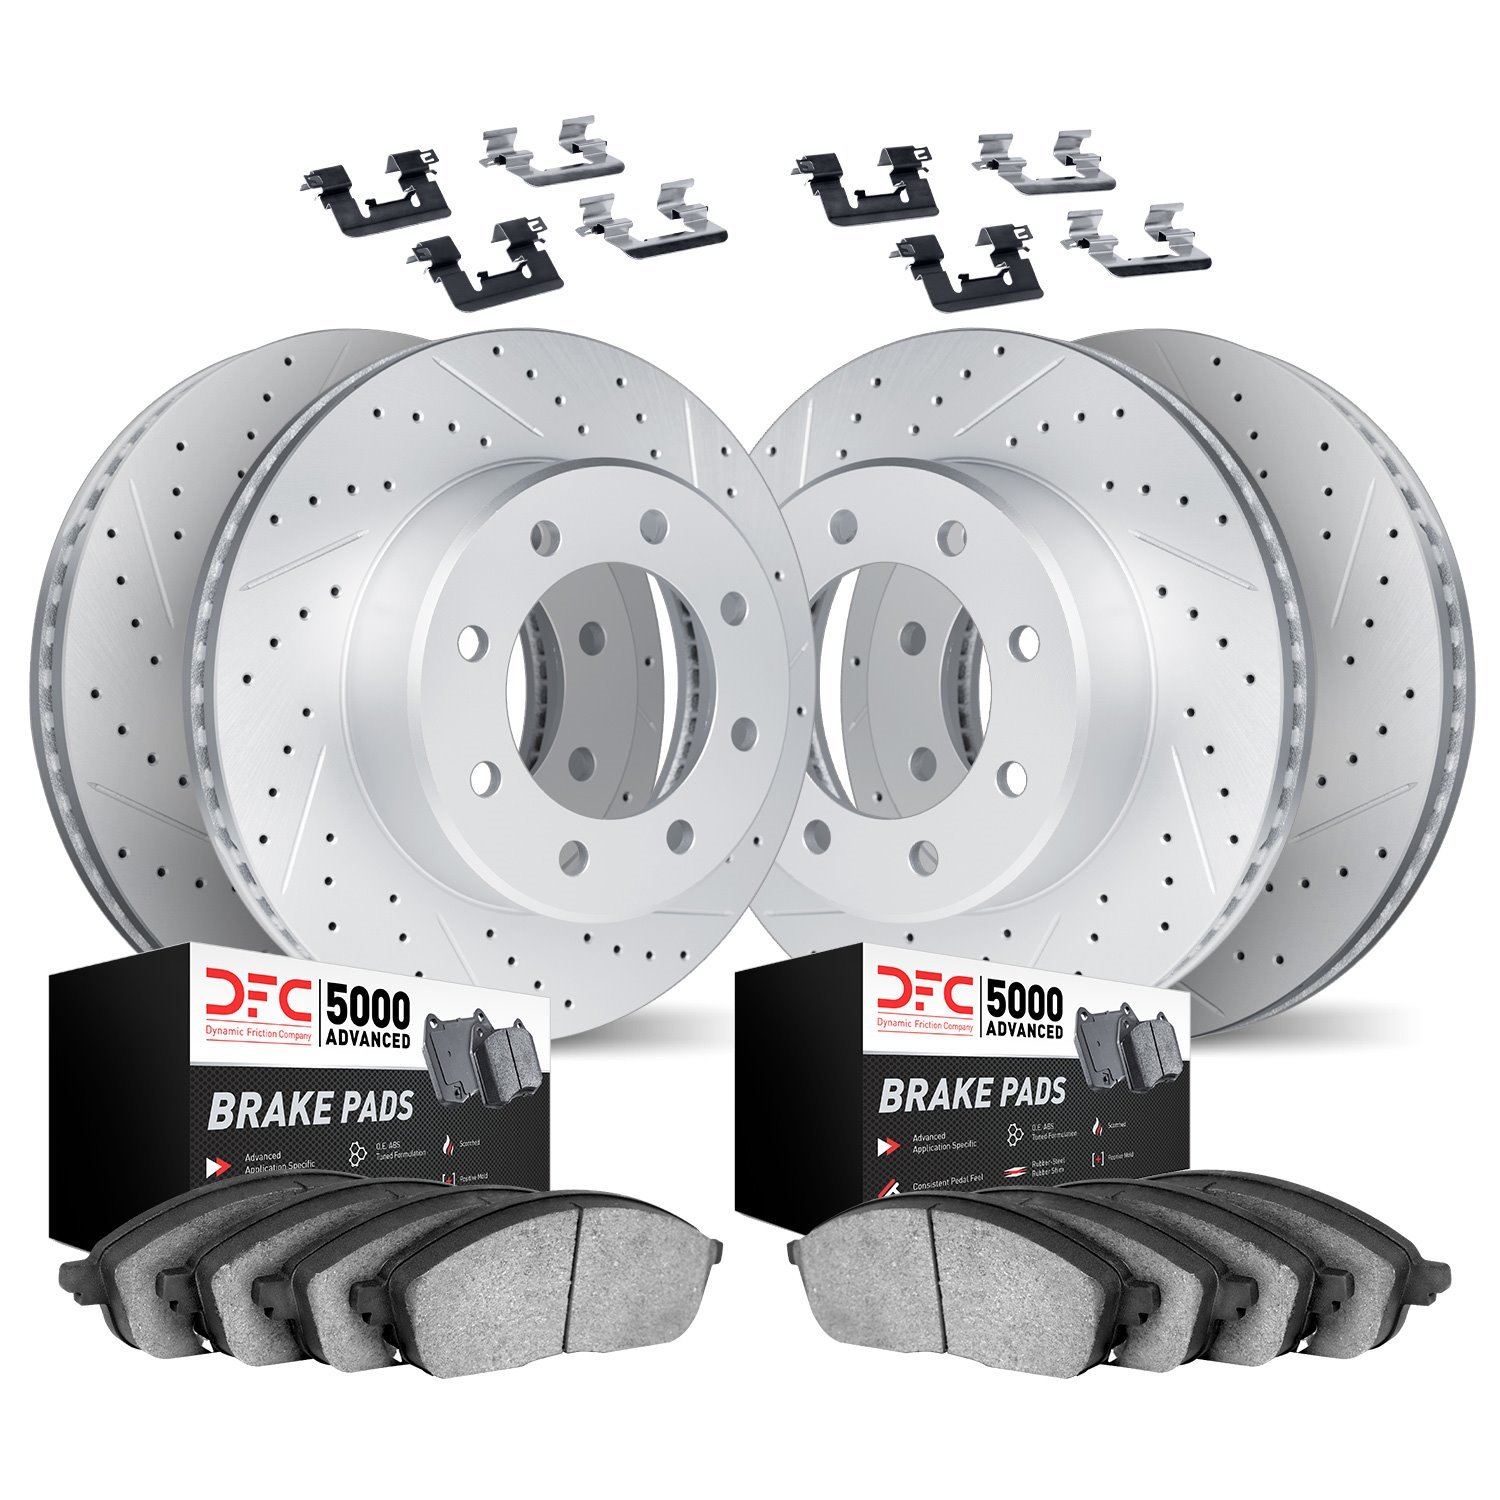 2514-54261 Geoperformance Drilled/Slotted Rotors w/5000 Advanced Brake Pads Kit & Hardware, Fits Select Ford/Lincoln/Mercury/Maz